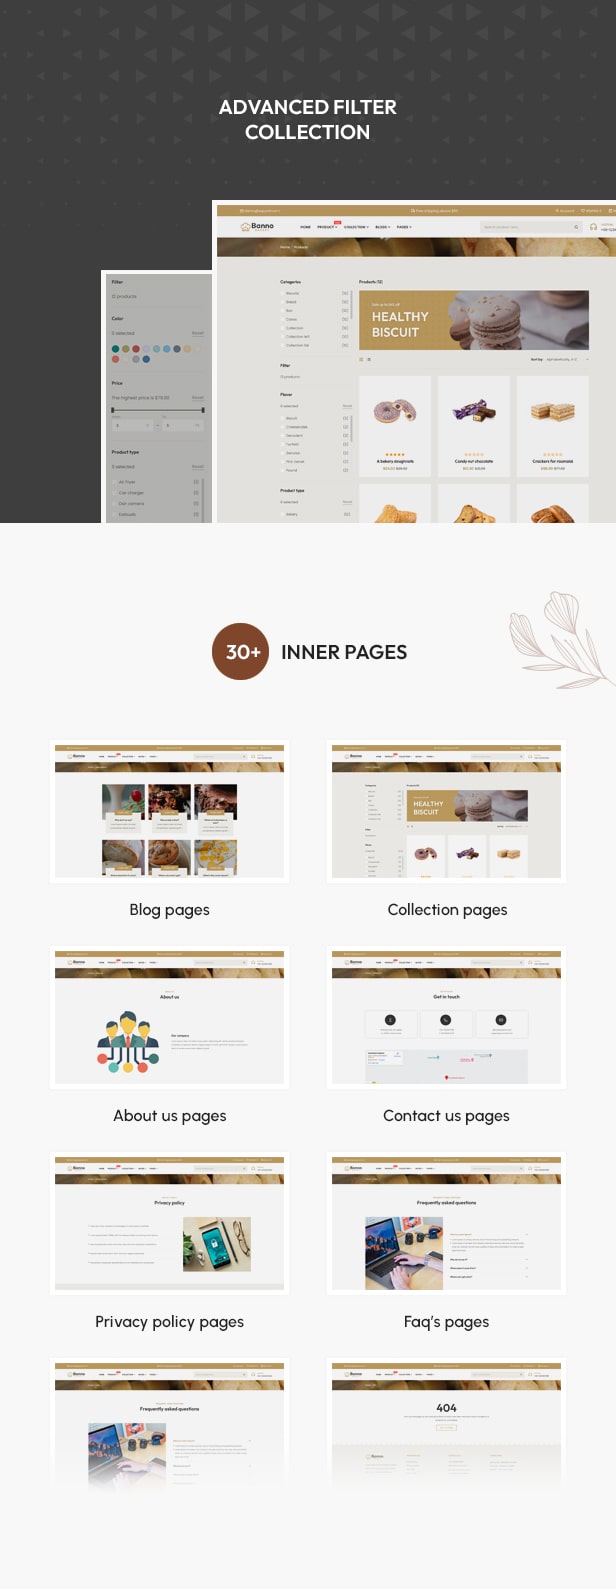 Banno - The Bakery & Chocolate eCommerce HTML5 Template - 2